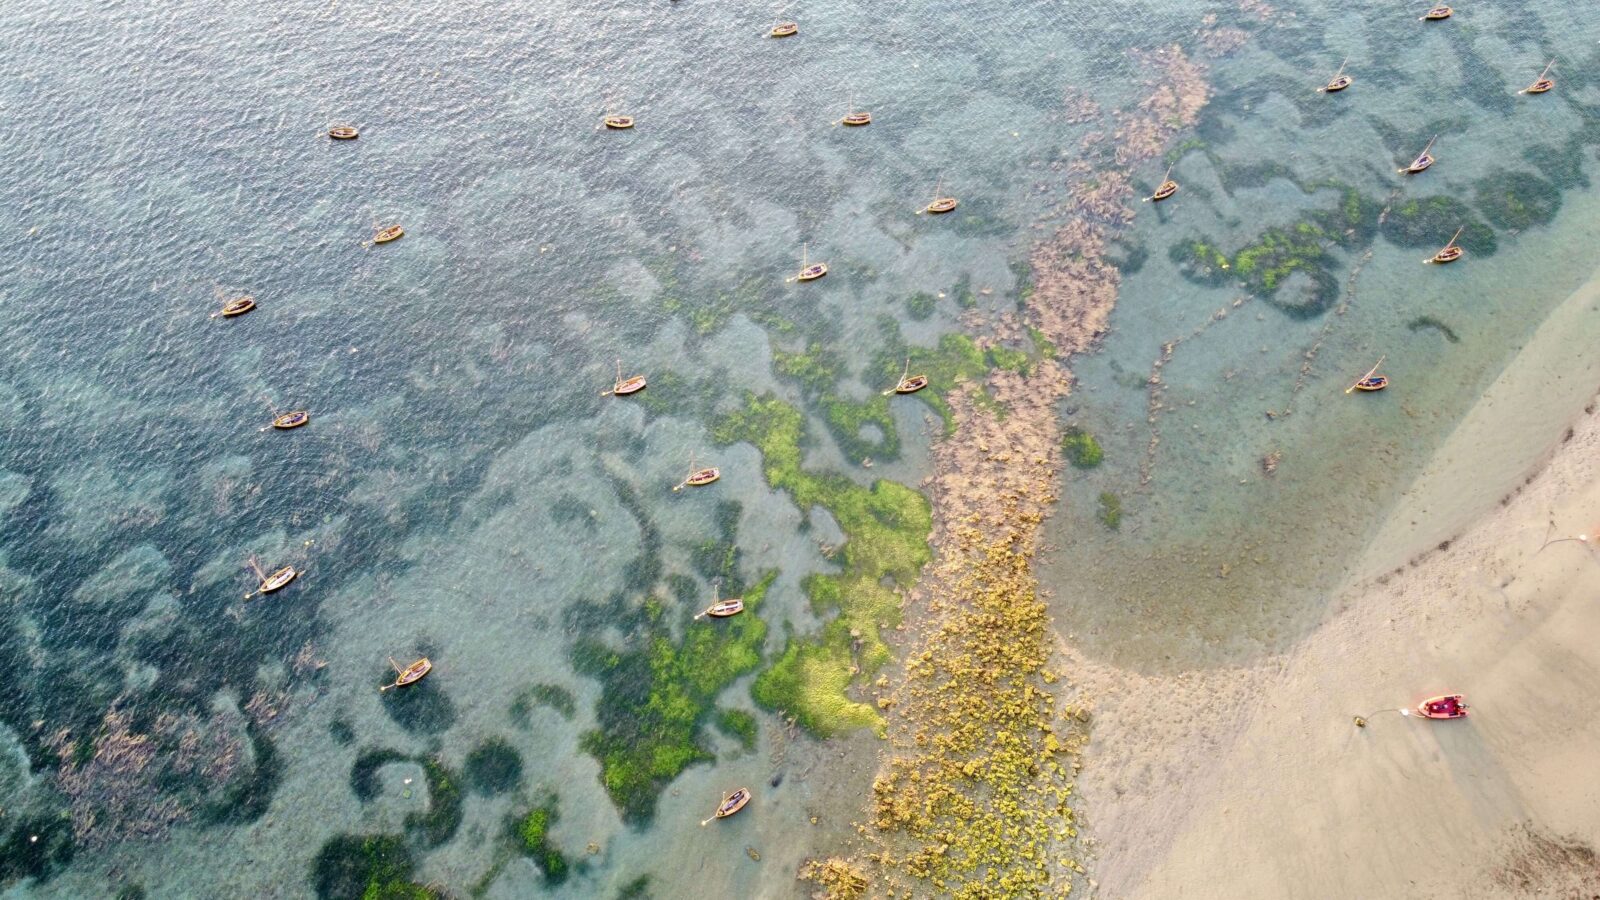 UAV imagery depicting mooring scars within seagrass meadow at Seaview, Isle of Wight. Photo credit: Anouska Mendzil